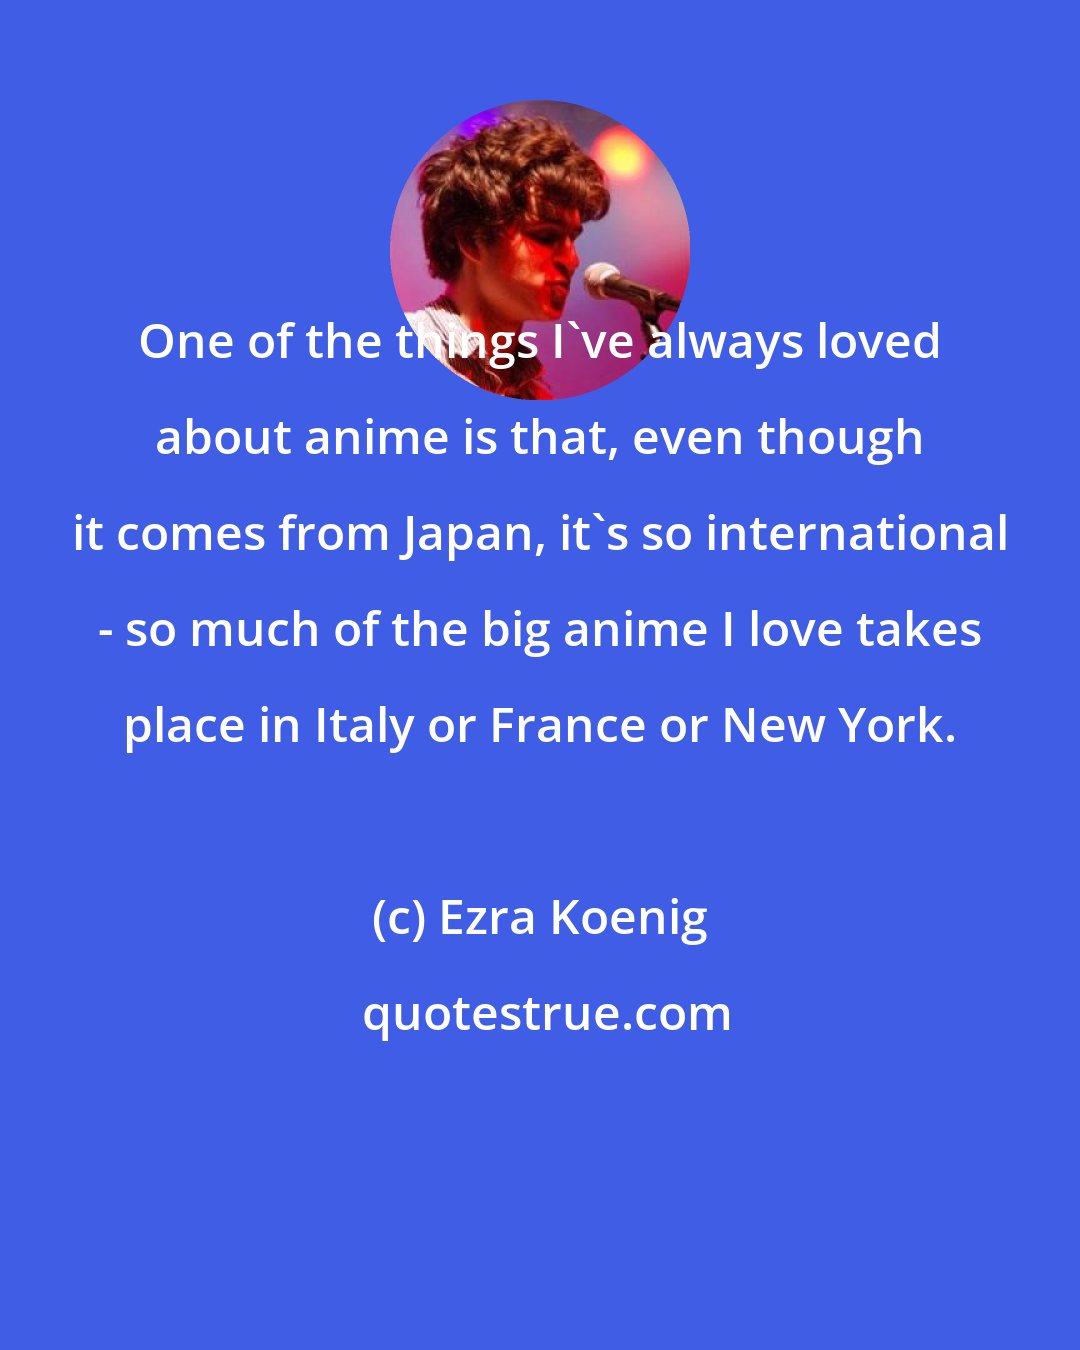 Ezra Koenig: One of the things I've always loved about anime is that, even though it comes from Japan, it's so international - so much of the big anime I love takes place in Italy or France or New York.